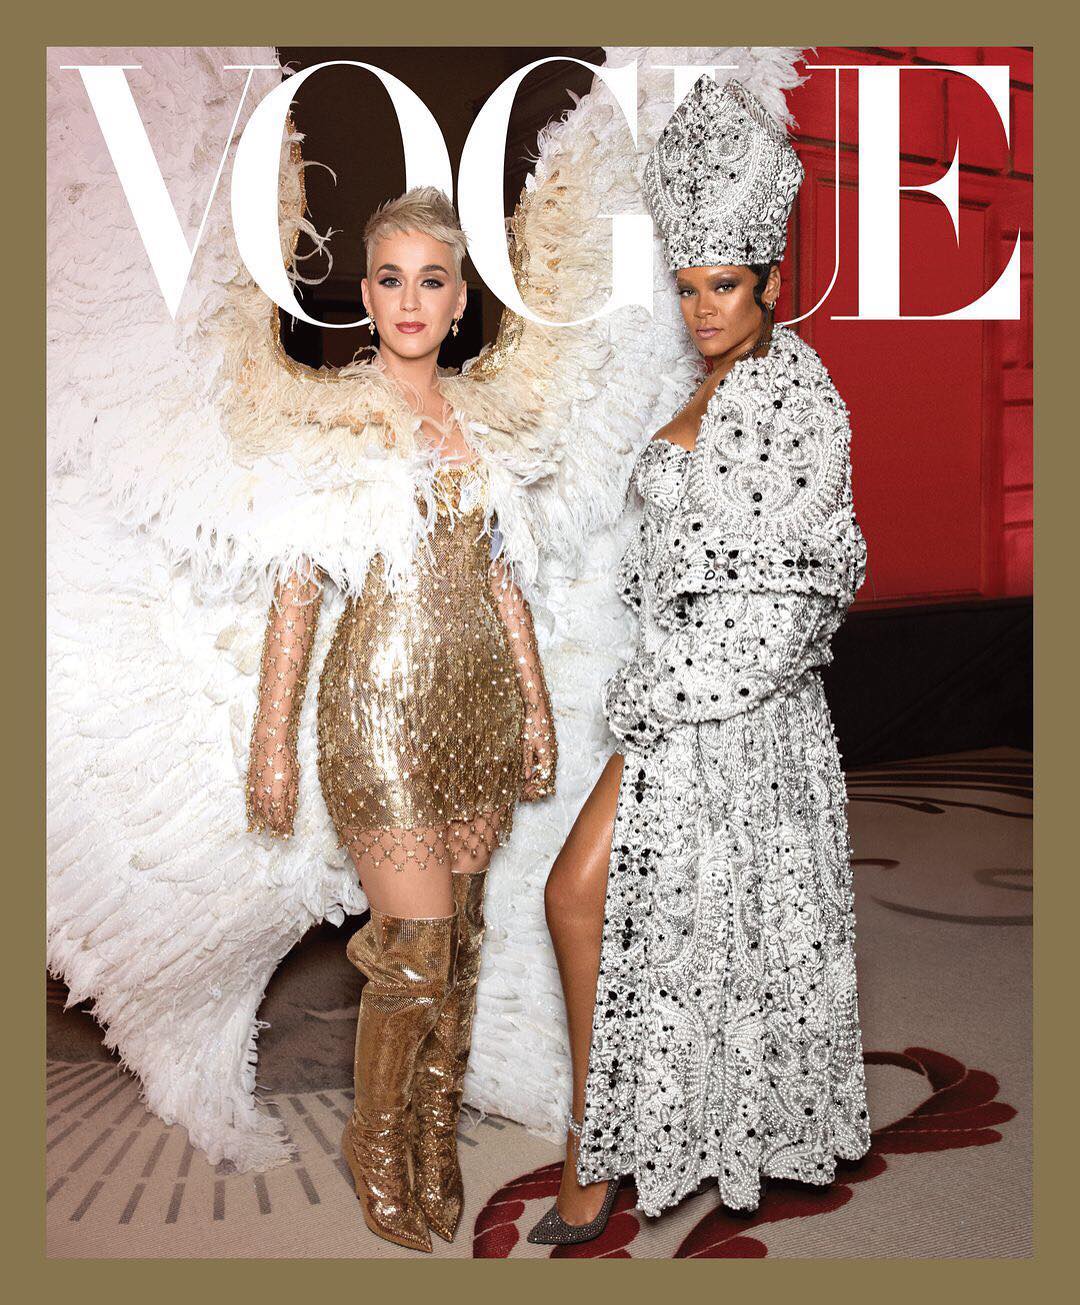 Rihanna & Katy Perry Cover Vogue's MET Gala Special Issue - That Grape Juice1080 x 1305